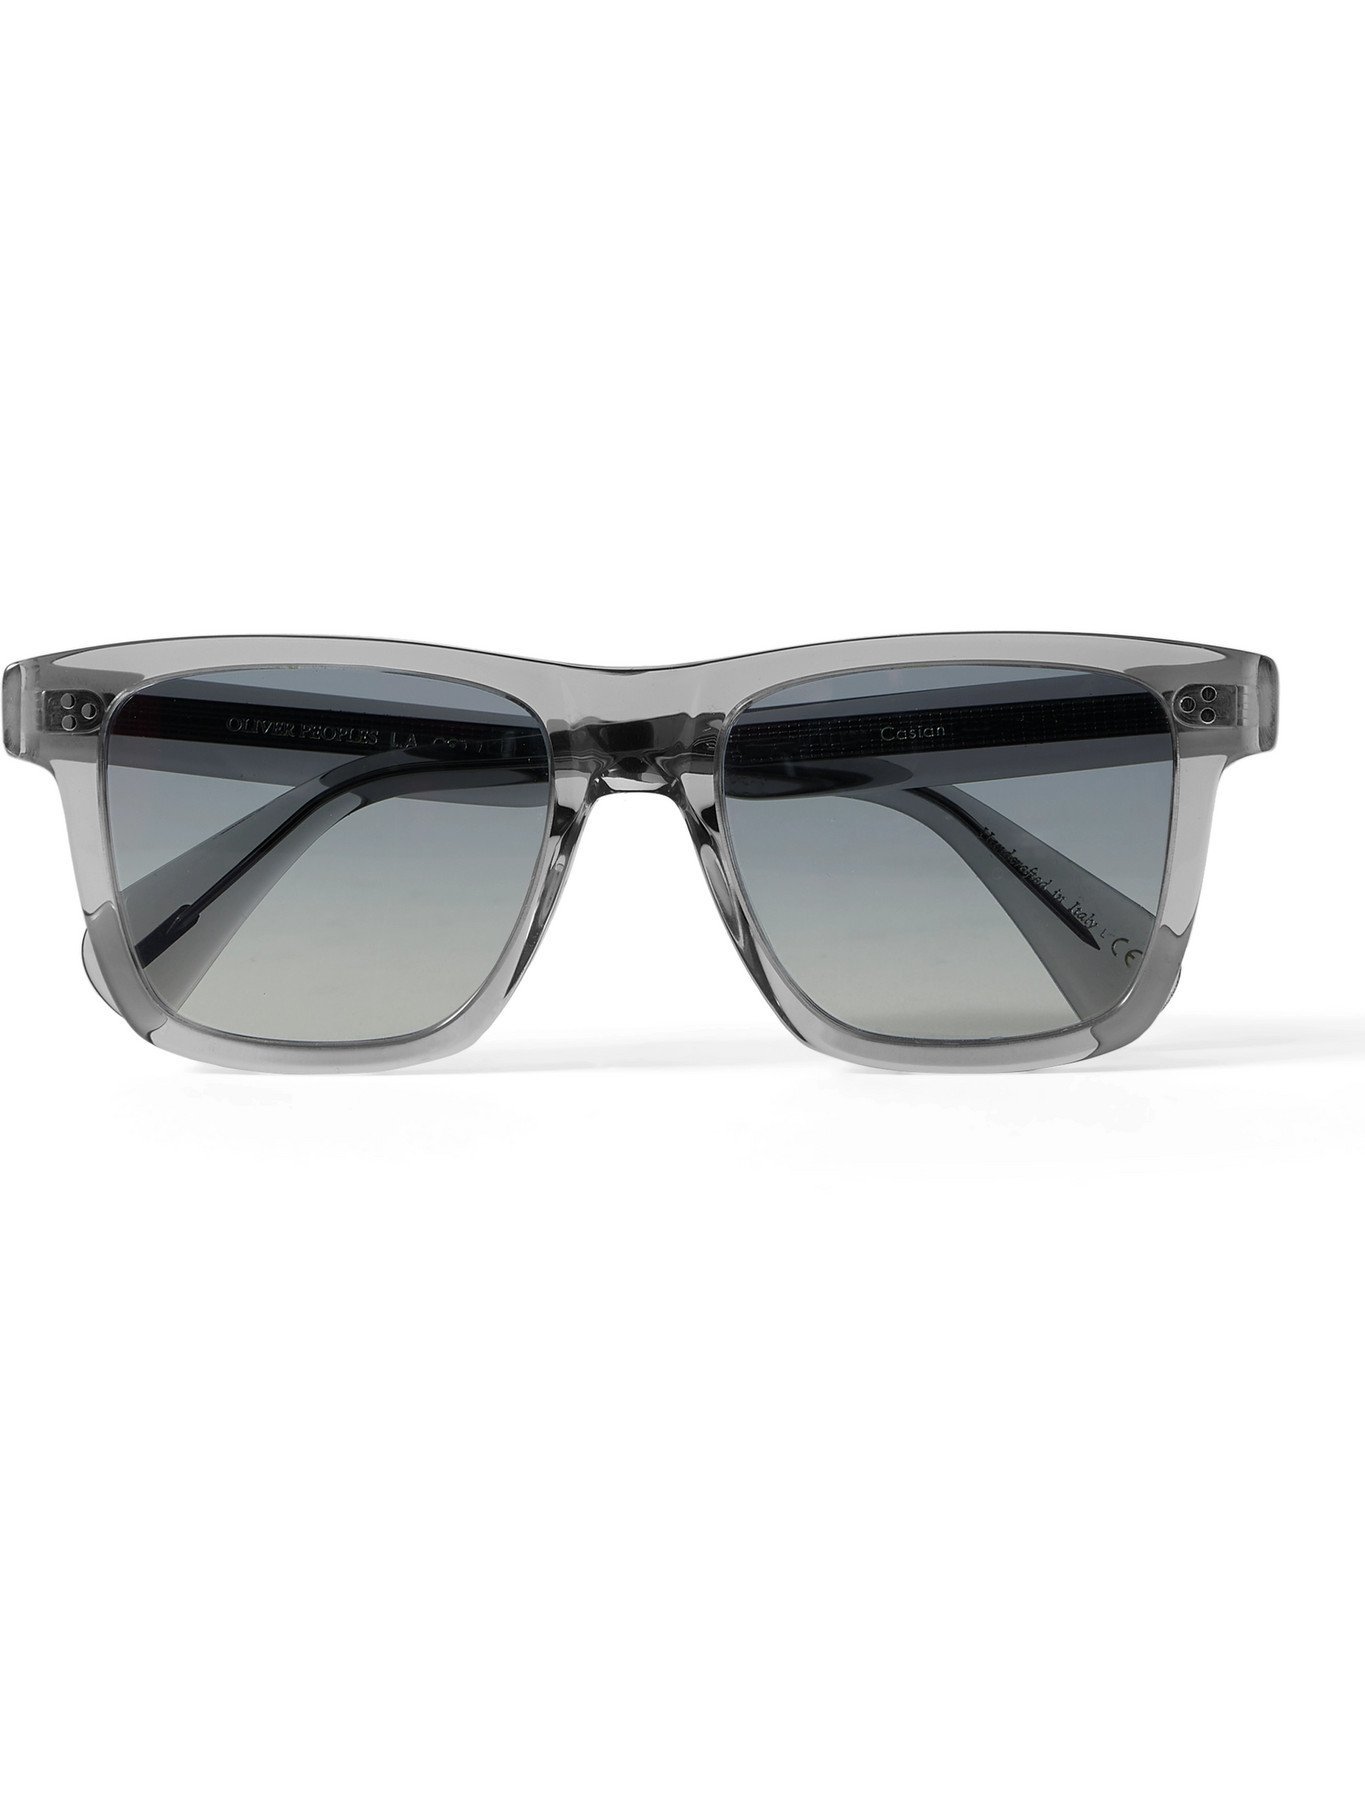 OLIVER PEOPLES - Casian Square-Frame Acetate Sunglasses - Gray Oliver  Peoples